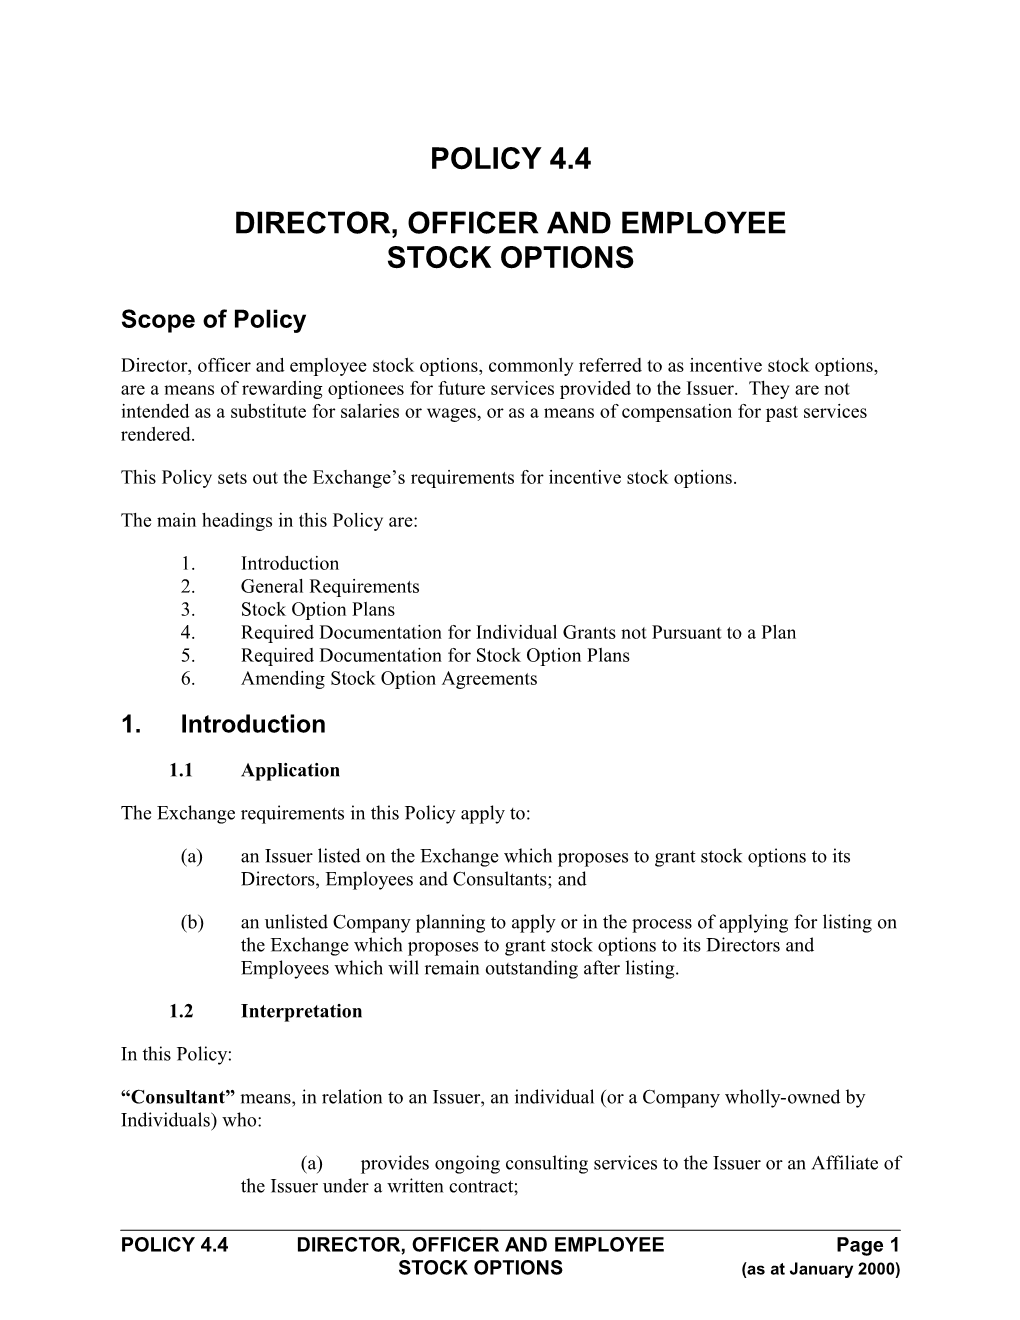 Director, OFFICER and EMPLOYEESTOCK OPTIONS